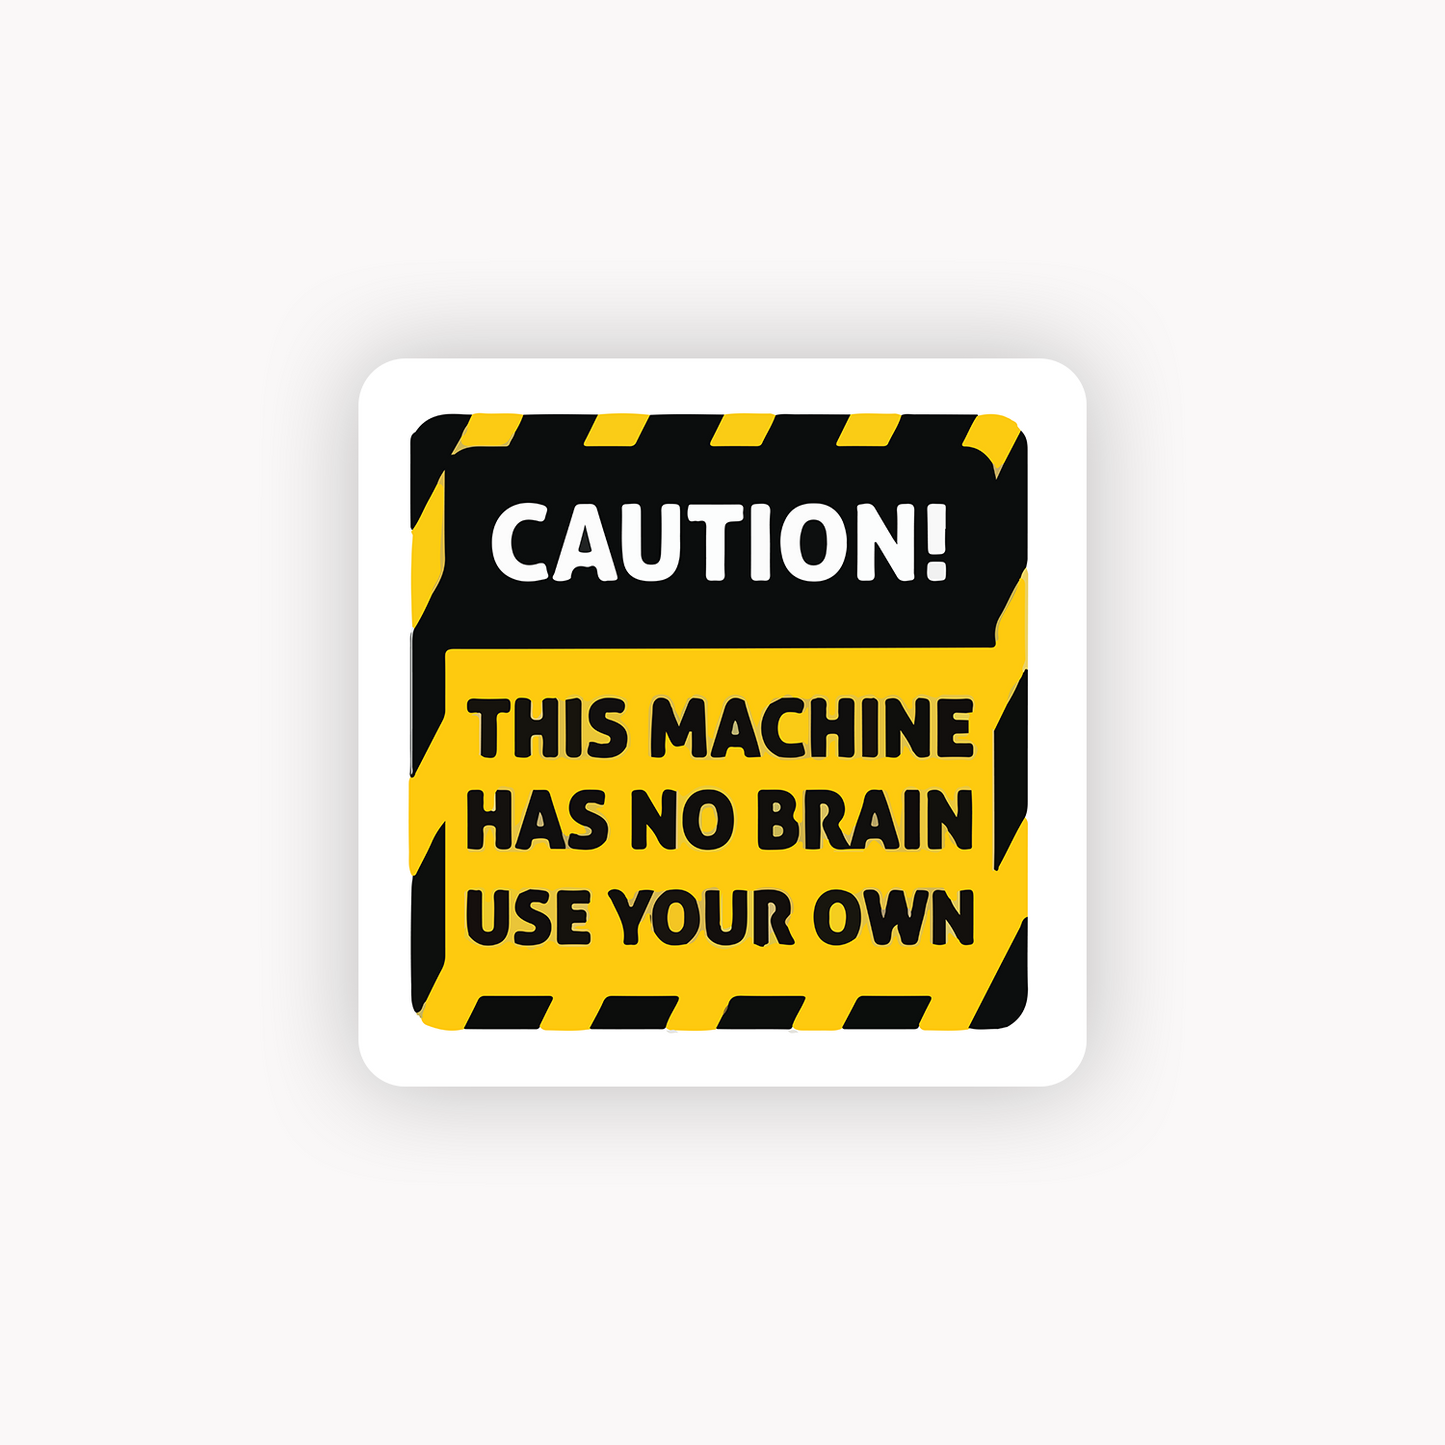 Caution this machine has no brain use your own